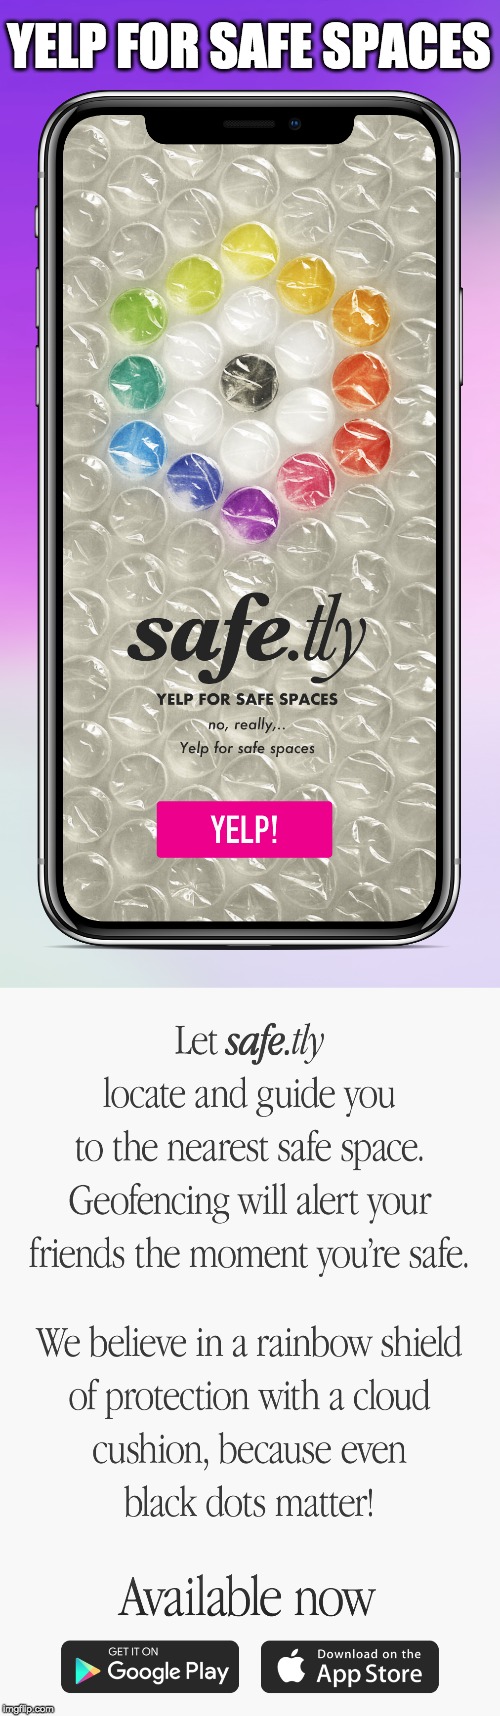 There's an app for that! | YELP FOR SAFE SPACES | image tagged in safetly | made w/ Imgflip meme maker